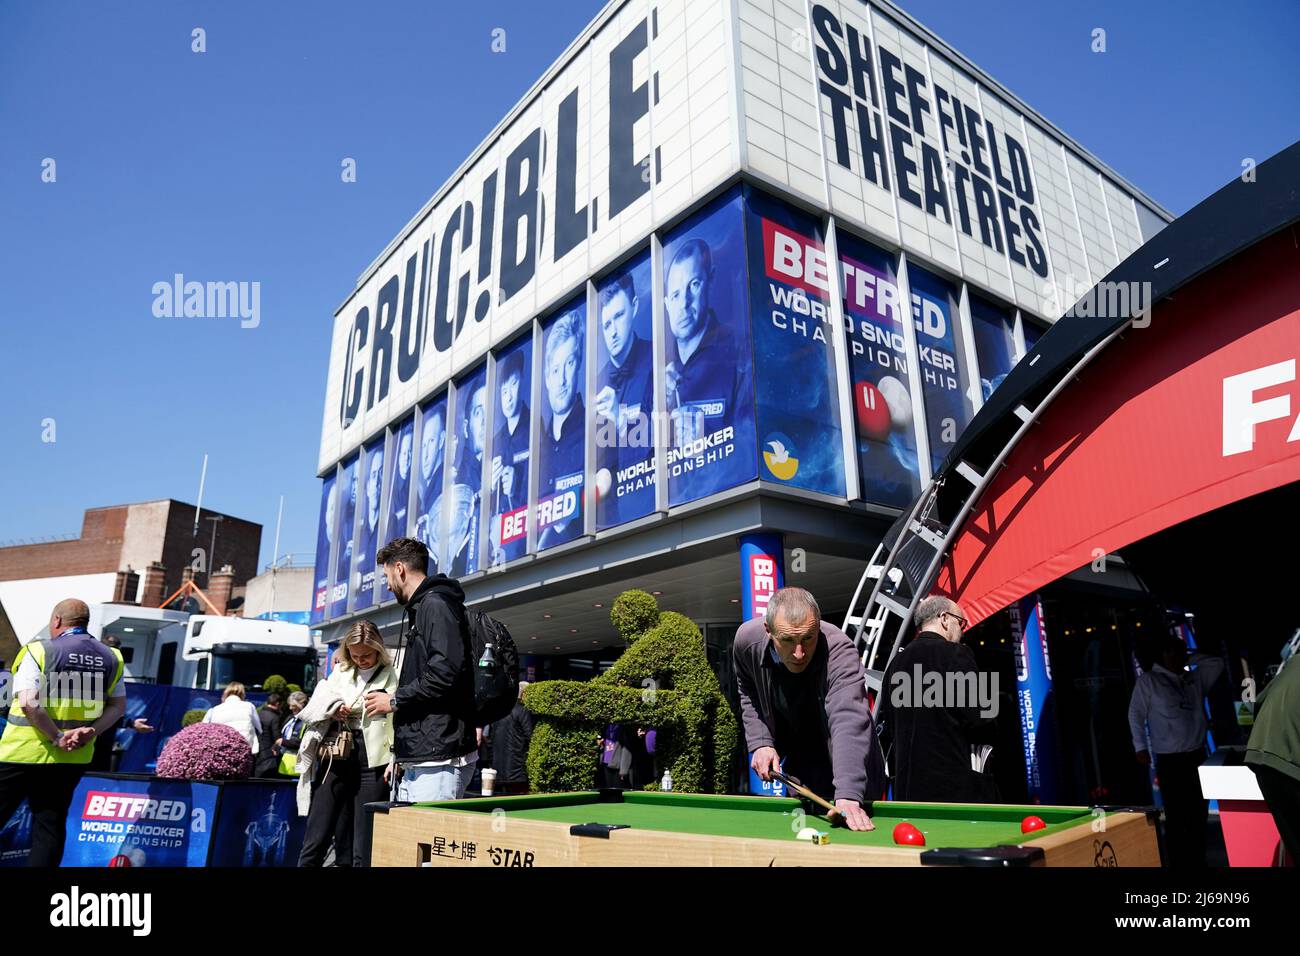 A general view outside of the Crucible during day fourteen of the Betfred World Snooker Championship at The Crucible, Sheffield